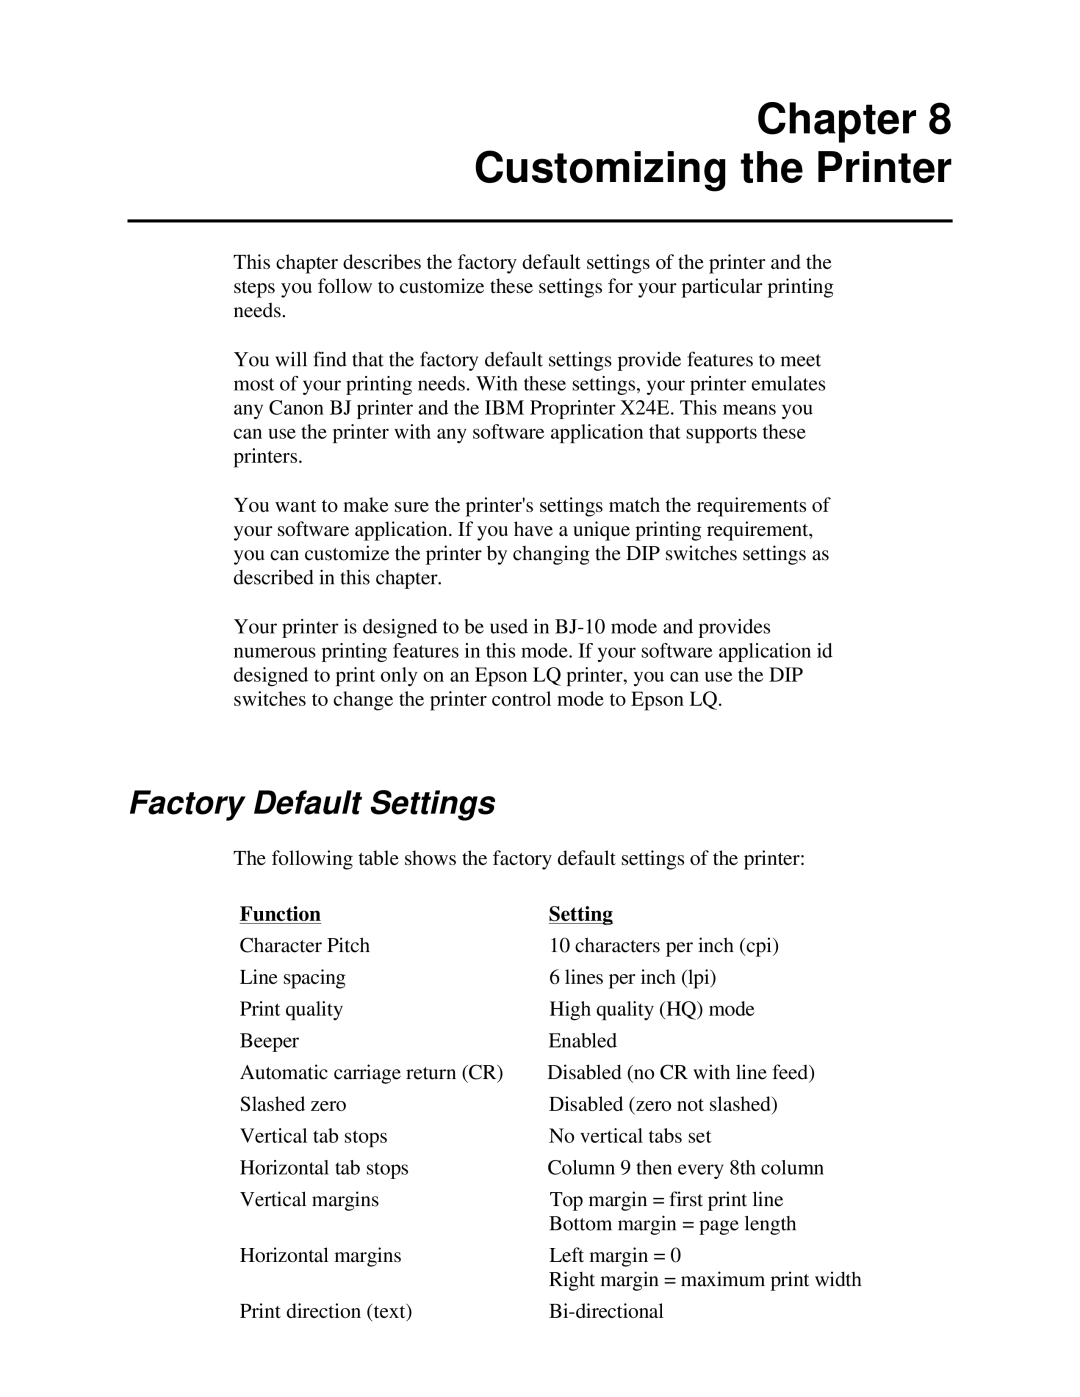 Canon BJ-230 user manual Chapter Customizing the Printer, Factory Default Settings, Function 